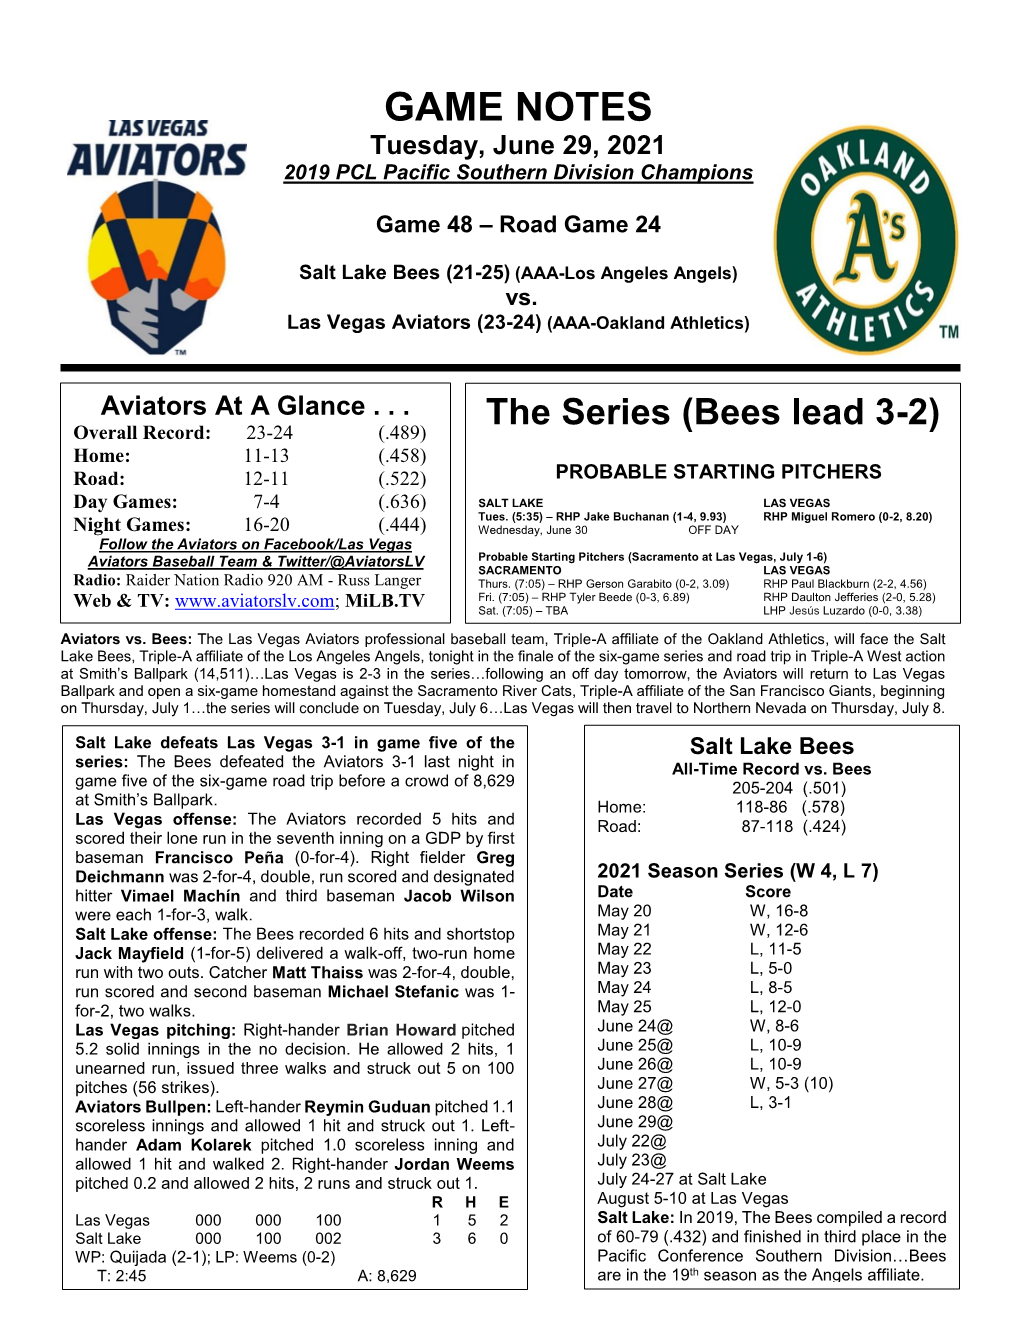 GAME NOTES Tuesday, June 29, 2021